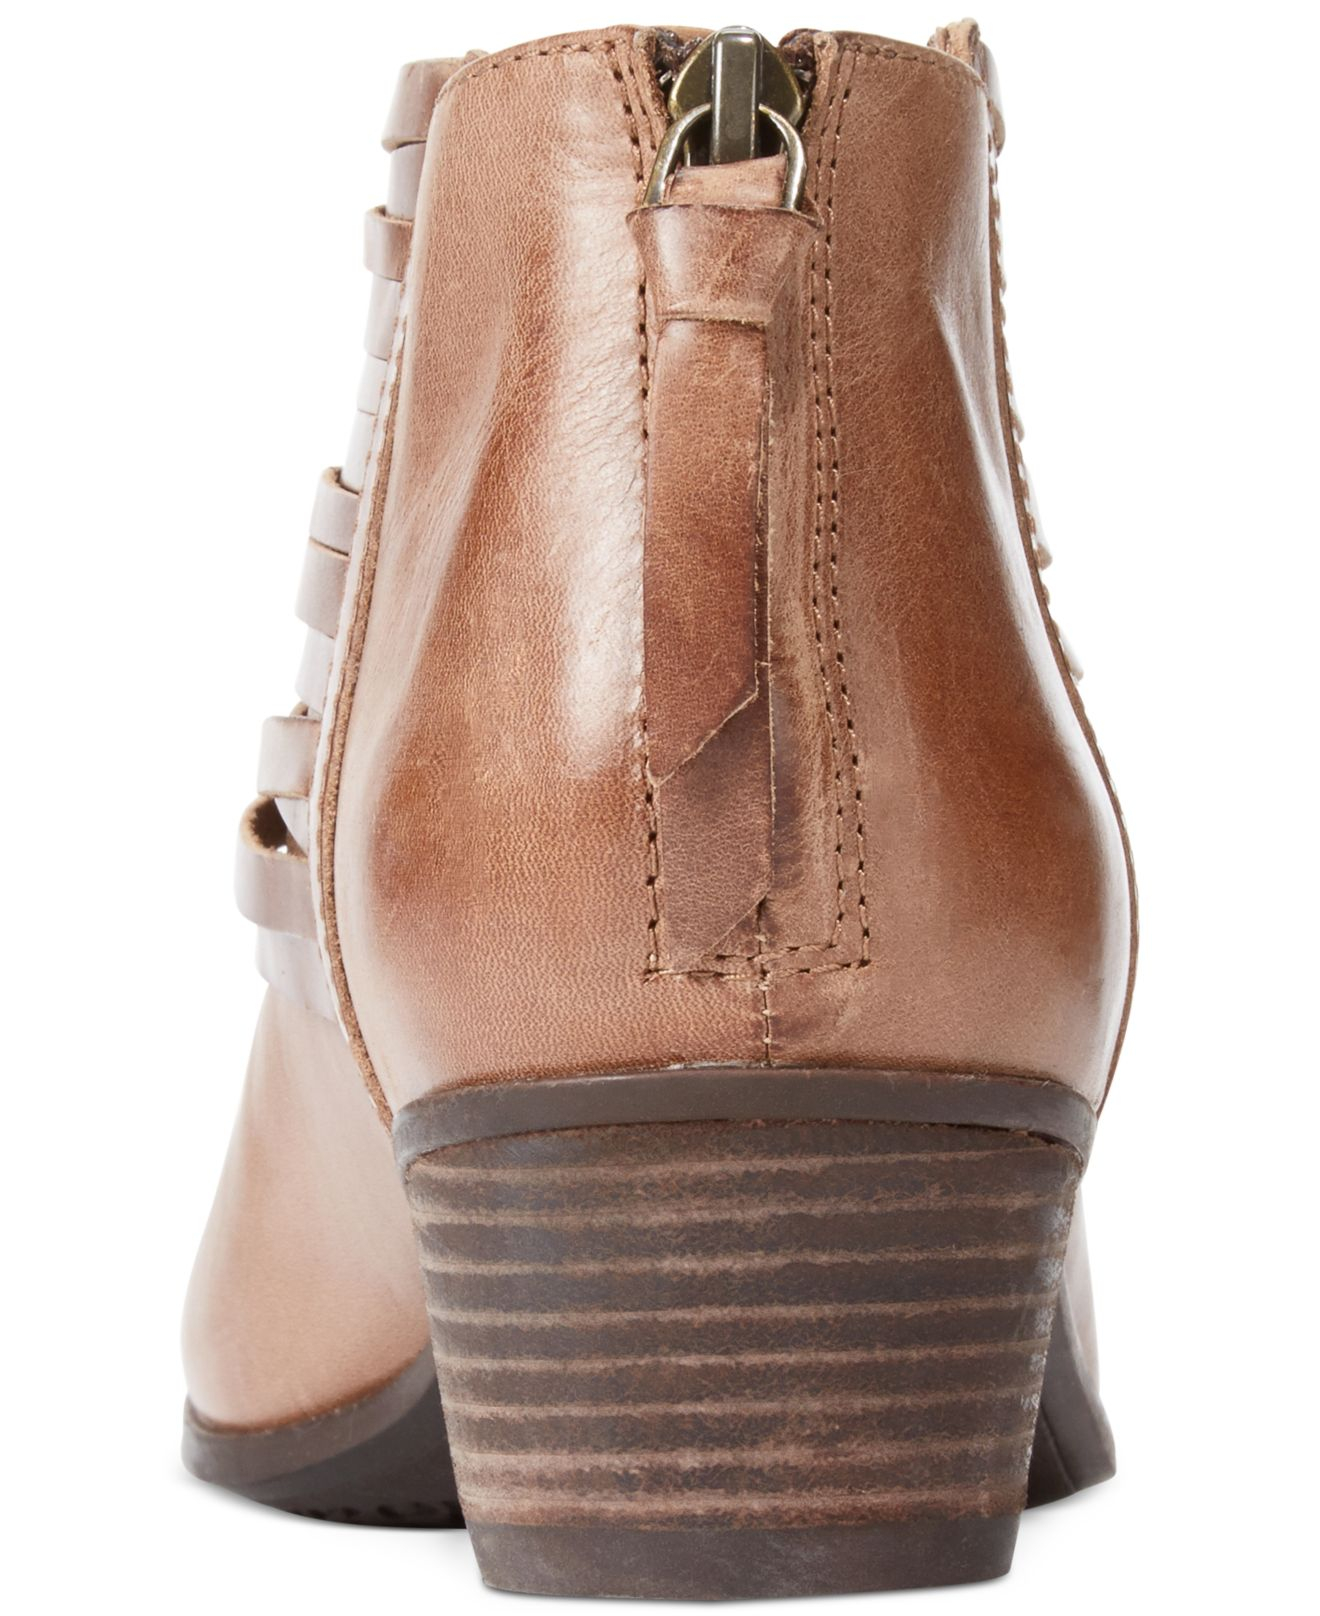 clarks artisan ankle boots